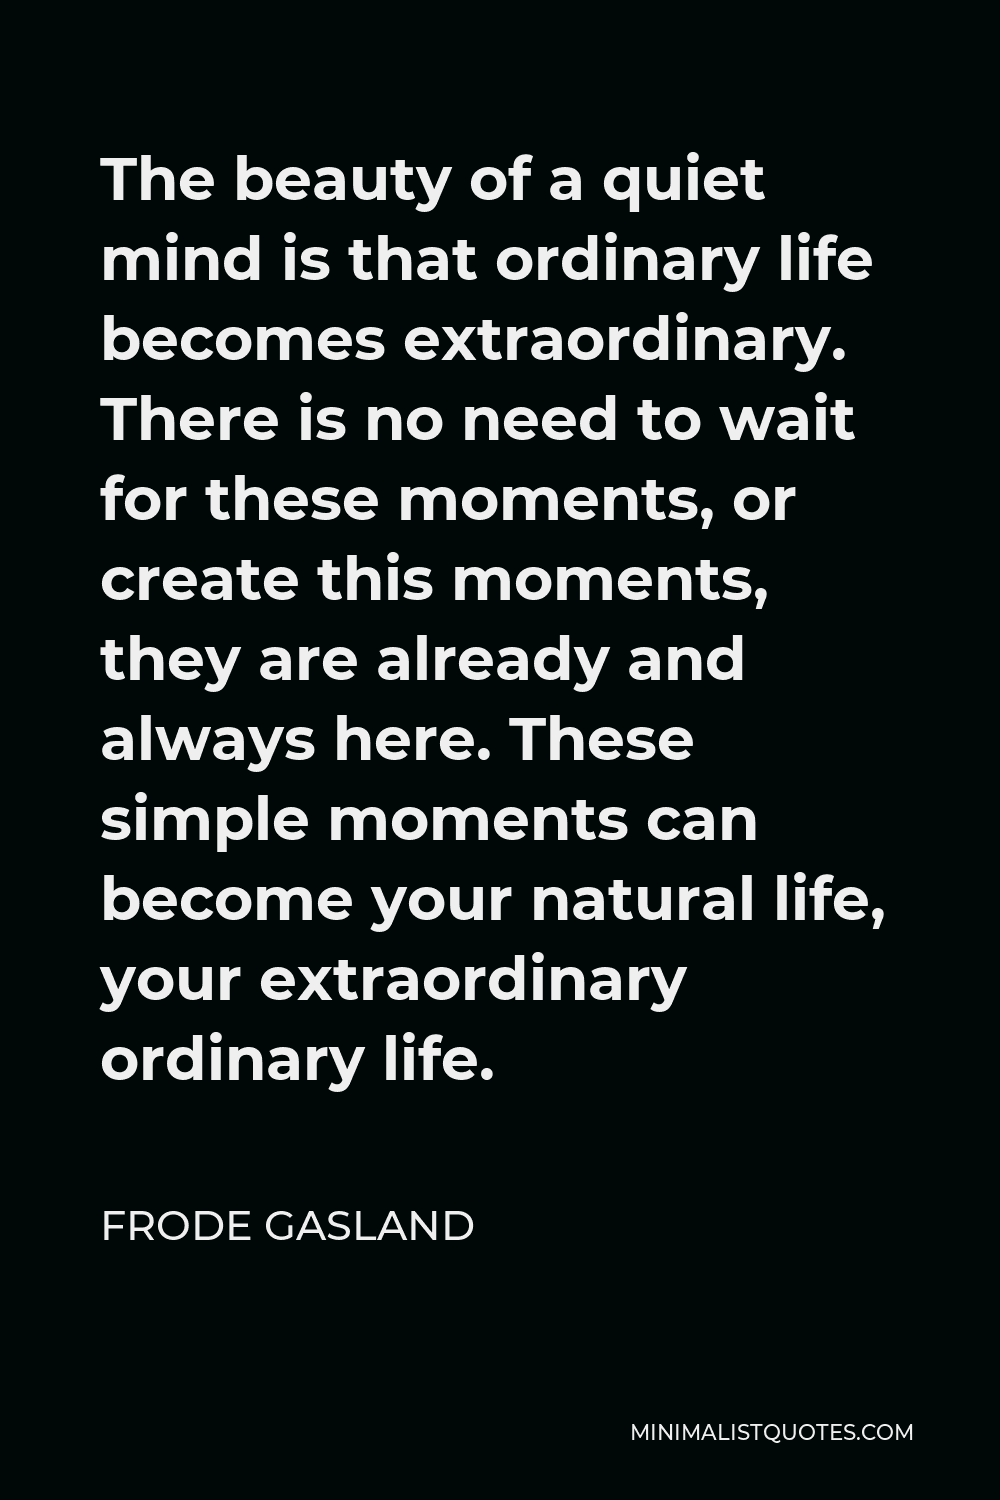 Frode Gasland Quote - The beauty of a quiet mind is that ordinary life becomes extraordinary. There is no need to wait for these moments, or create this moments, they are already and always here. These simple moments can become your natural life, your extraordinary ordinary life.